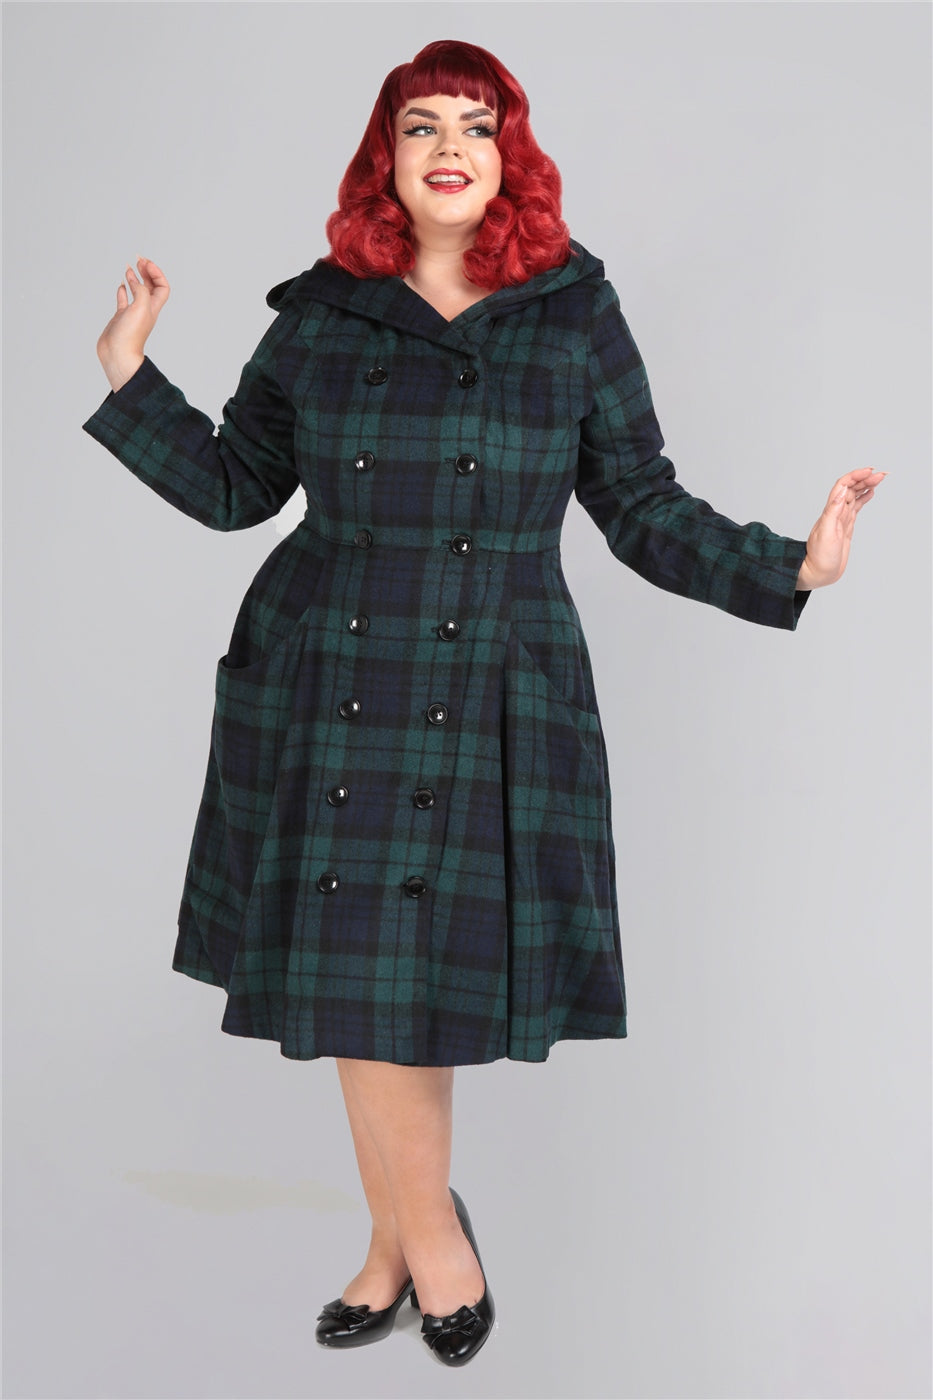 Red haired plus size model with 50s makeup posing in a knee length coat